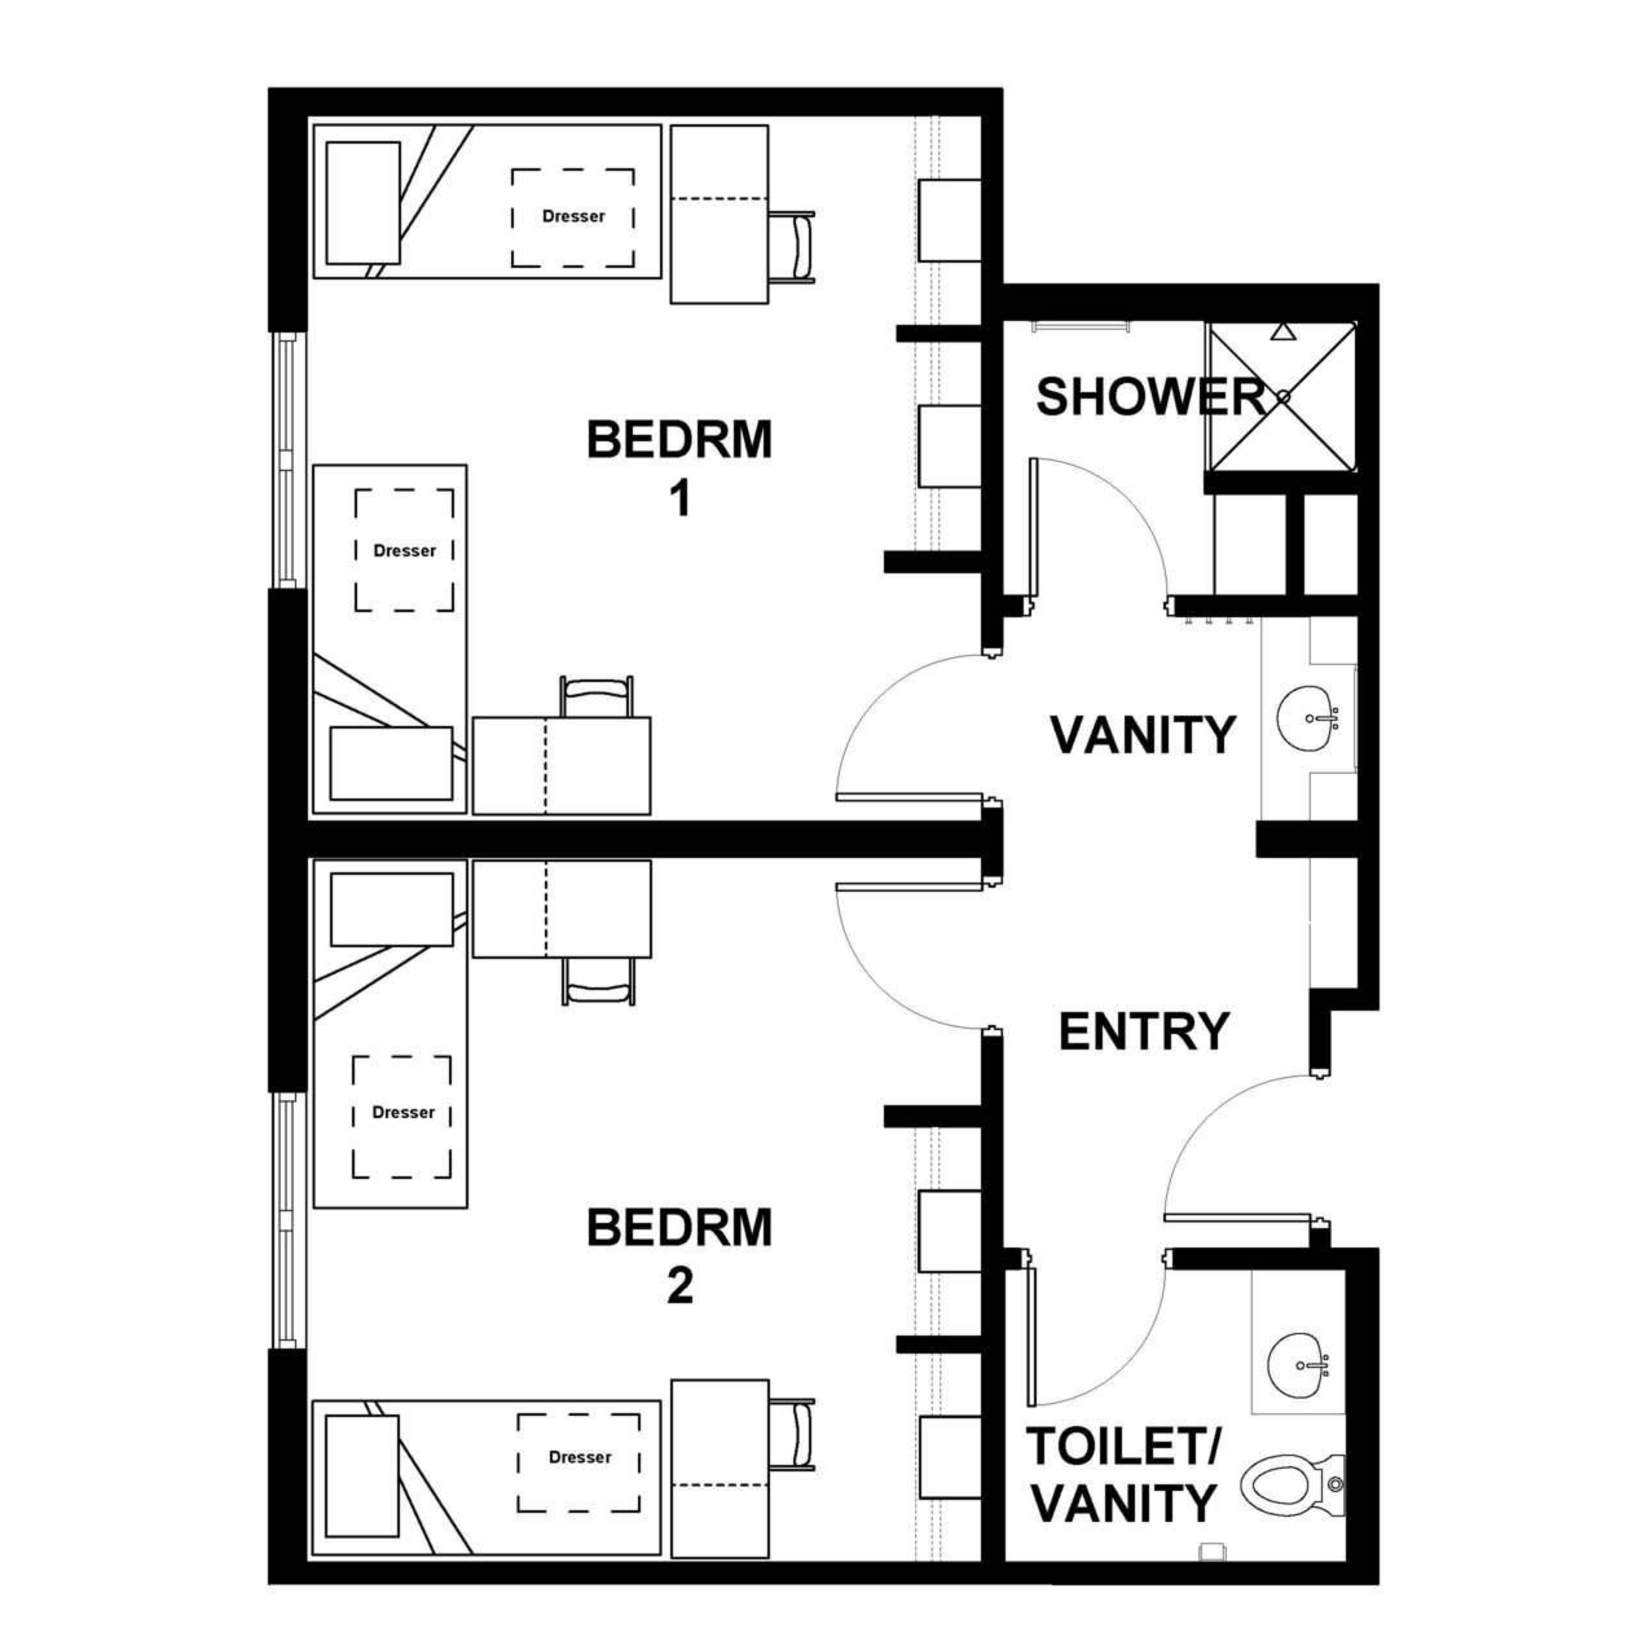 Sayers Hall double bedroom suite layout